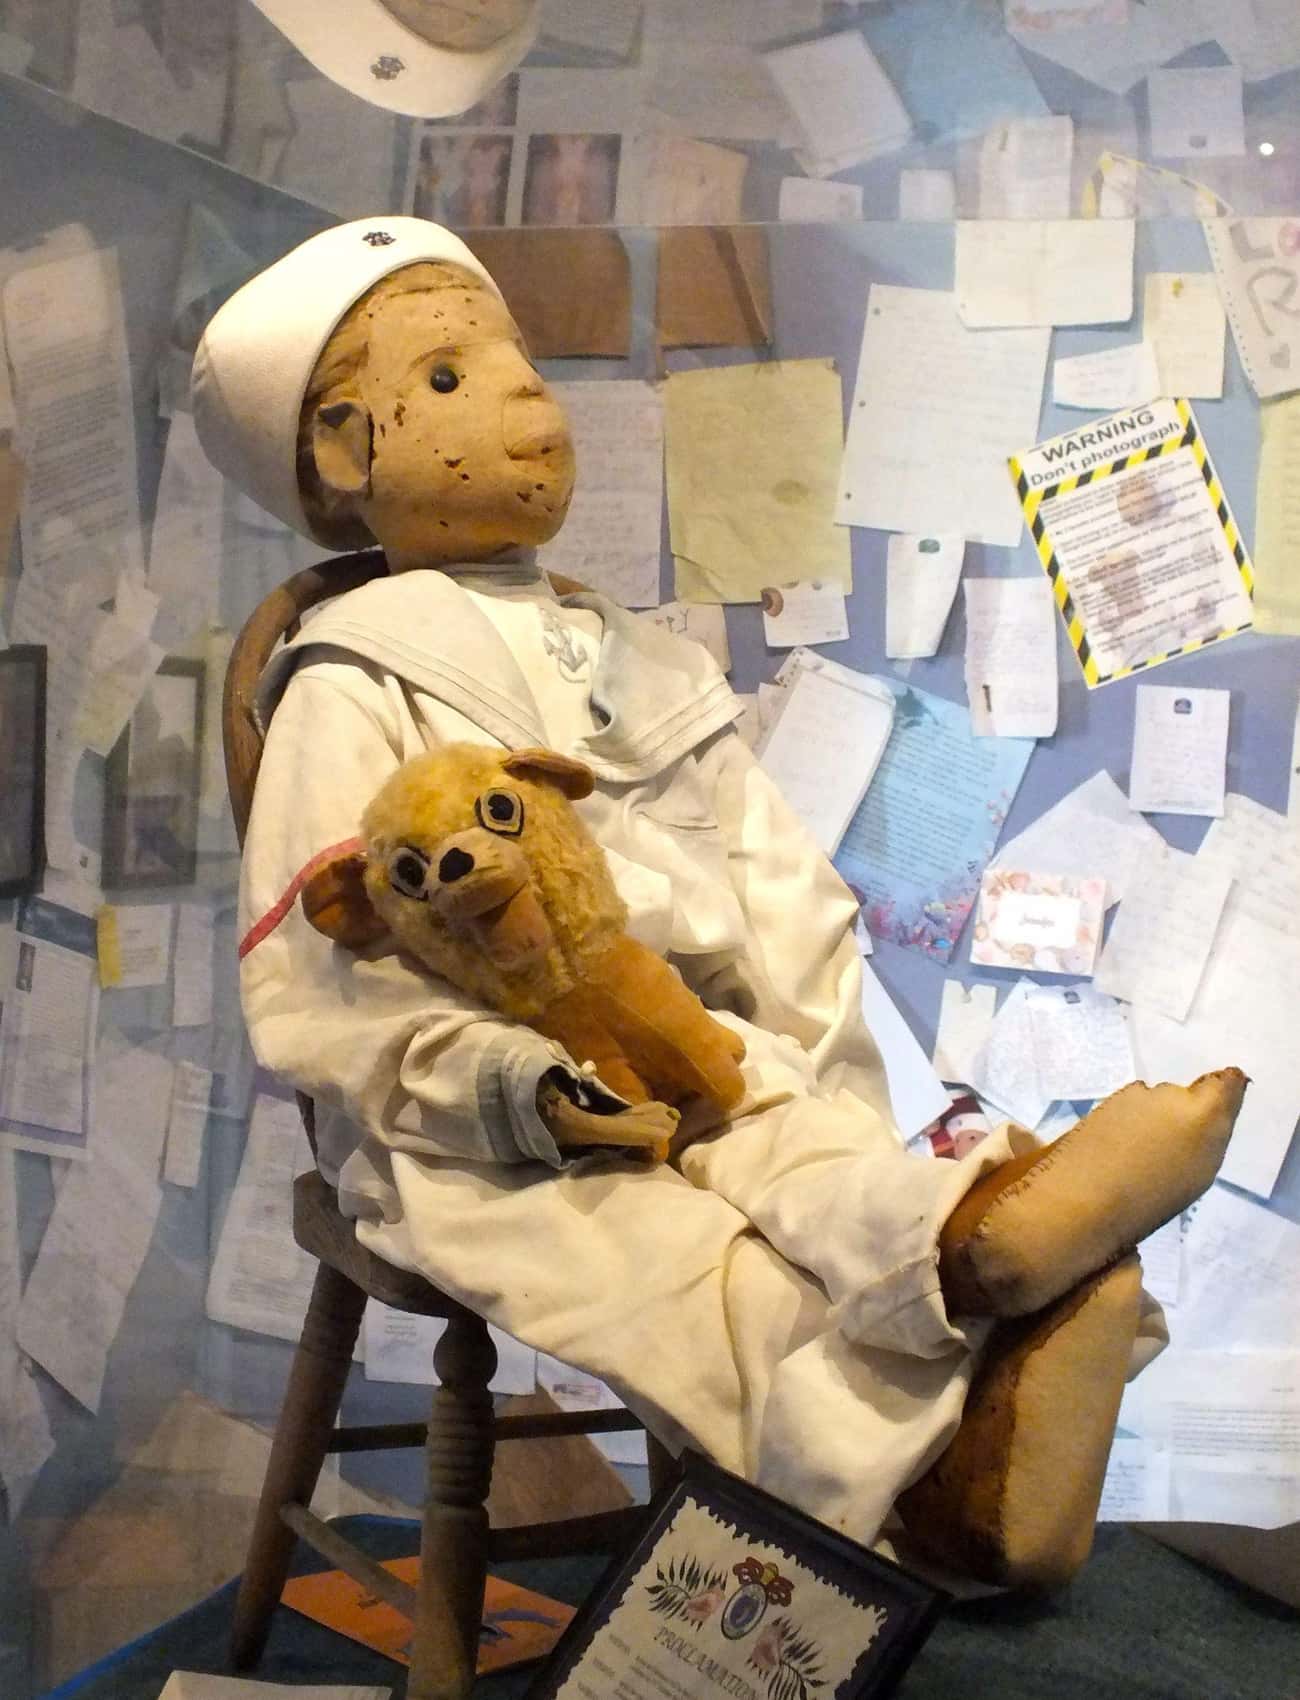 Robert The Doll Haunts A Museum In Key West